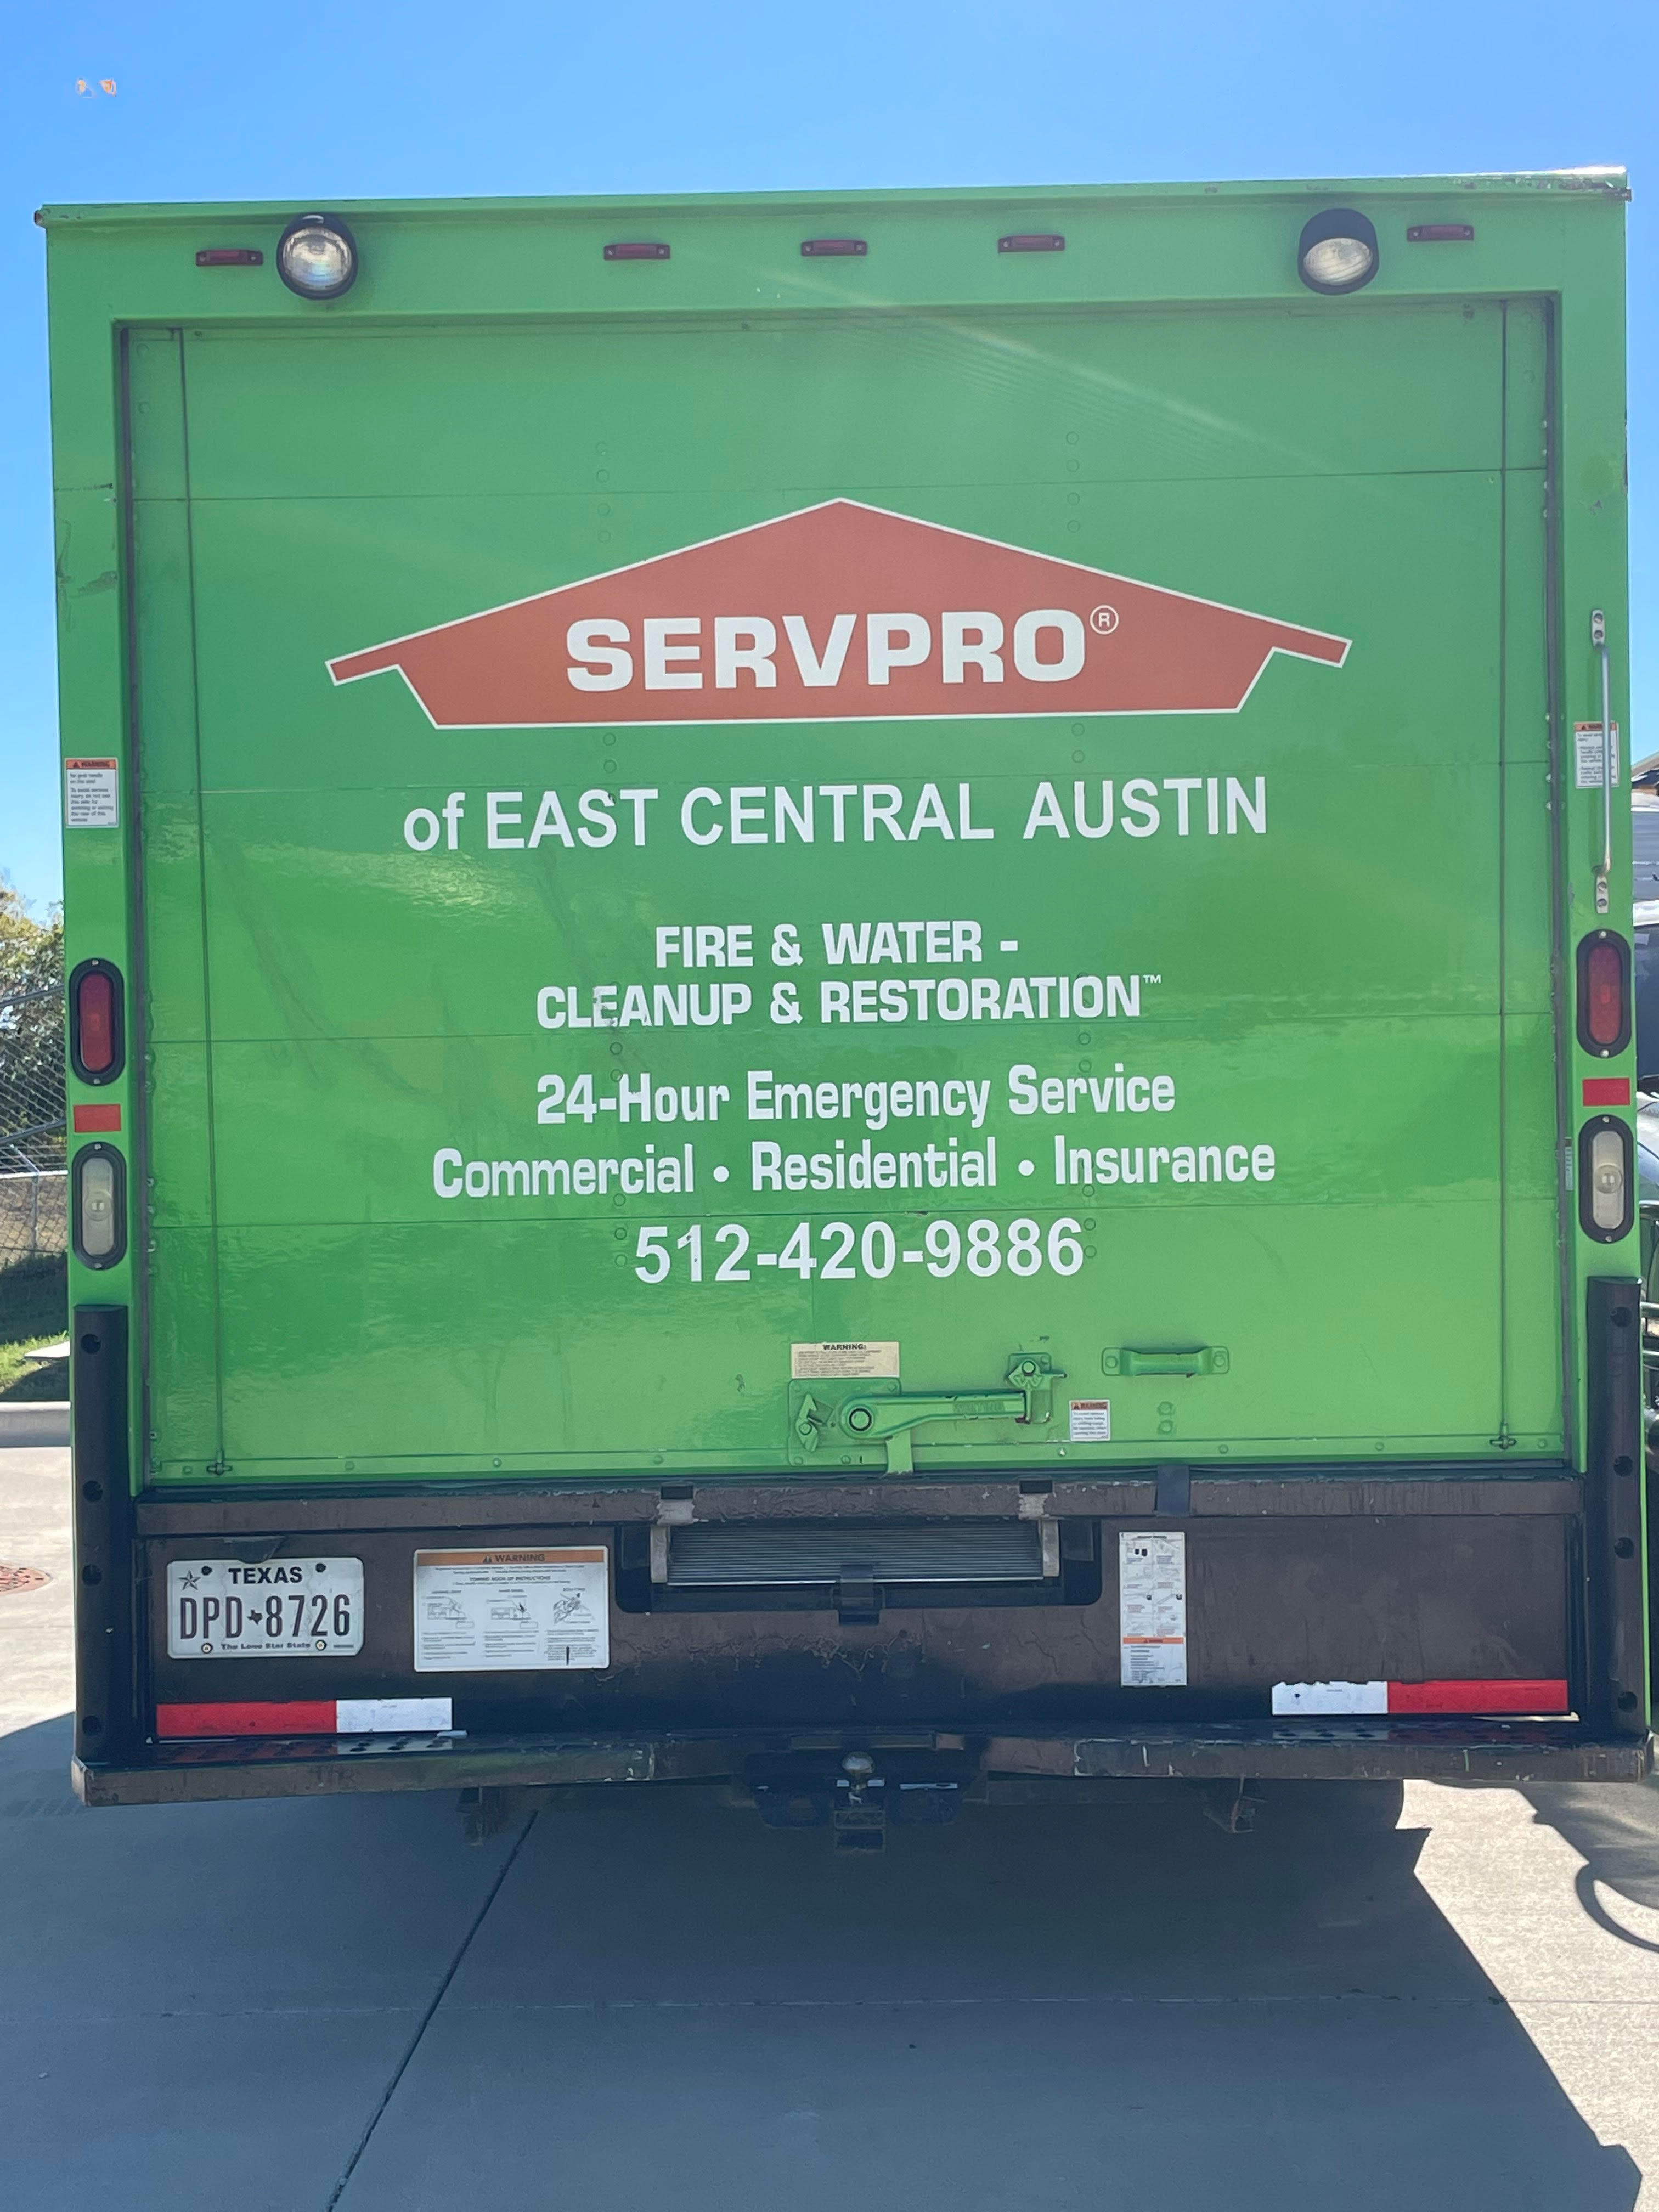 A SERVPRO® emergency response vehicle parked outside of the storefront.